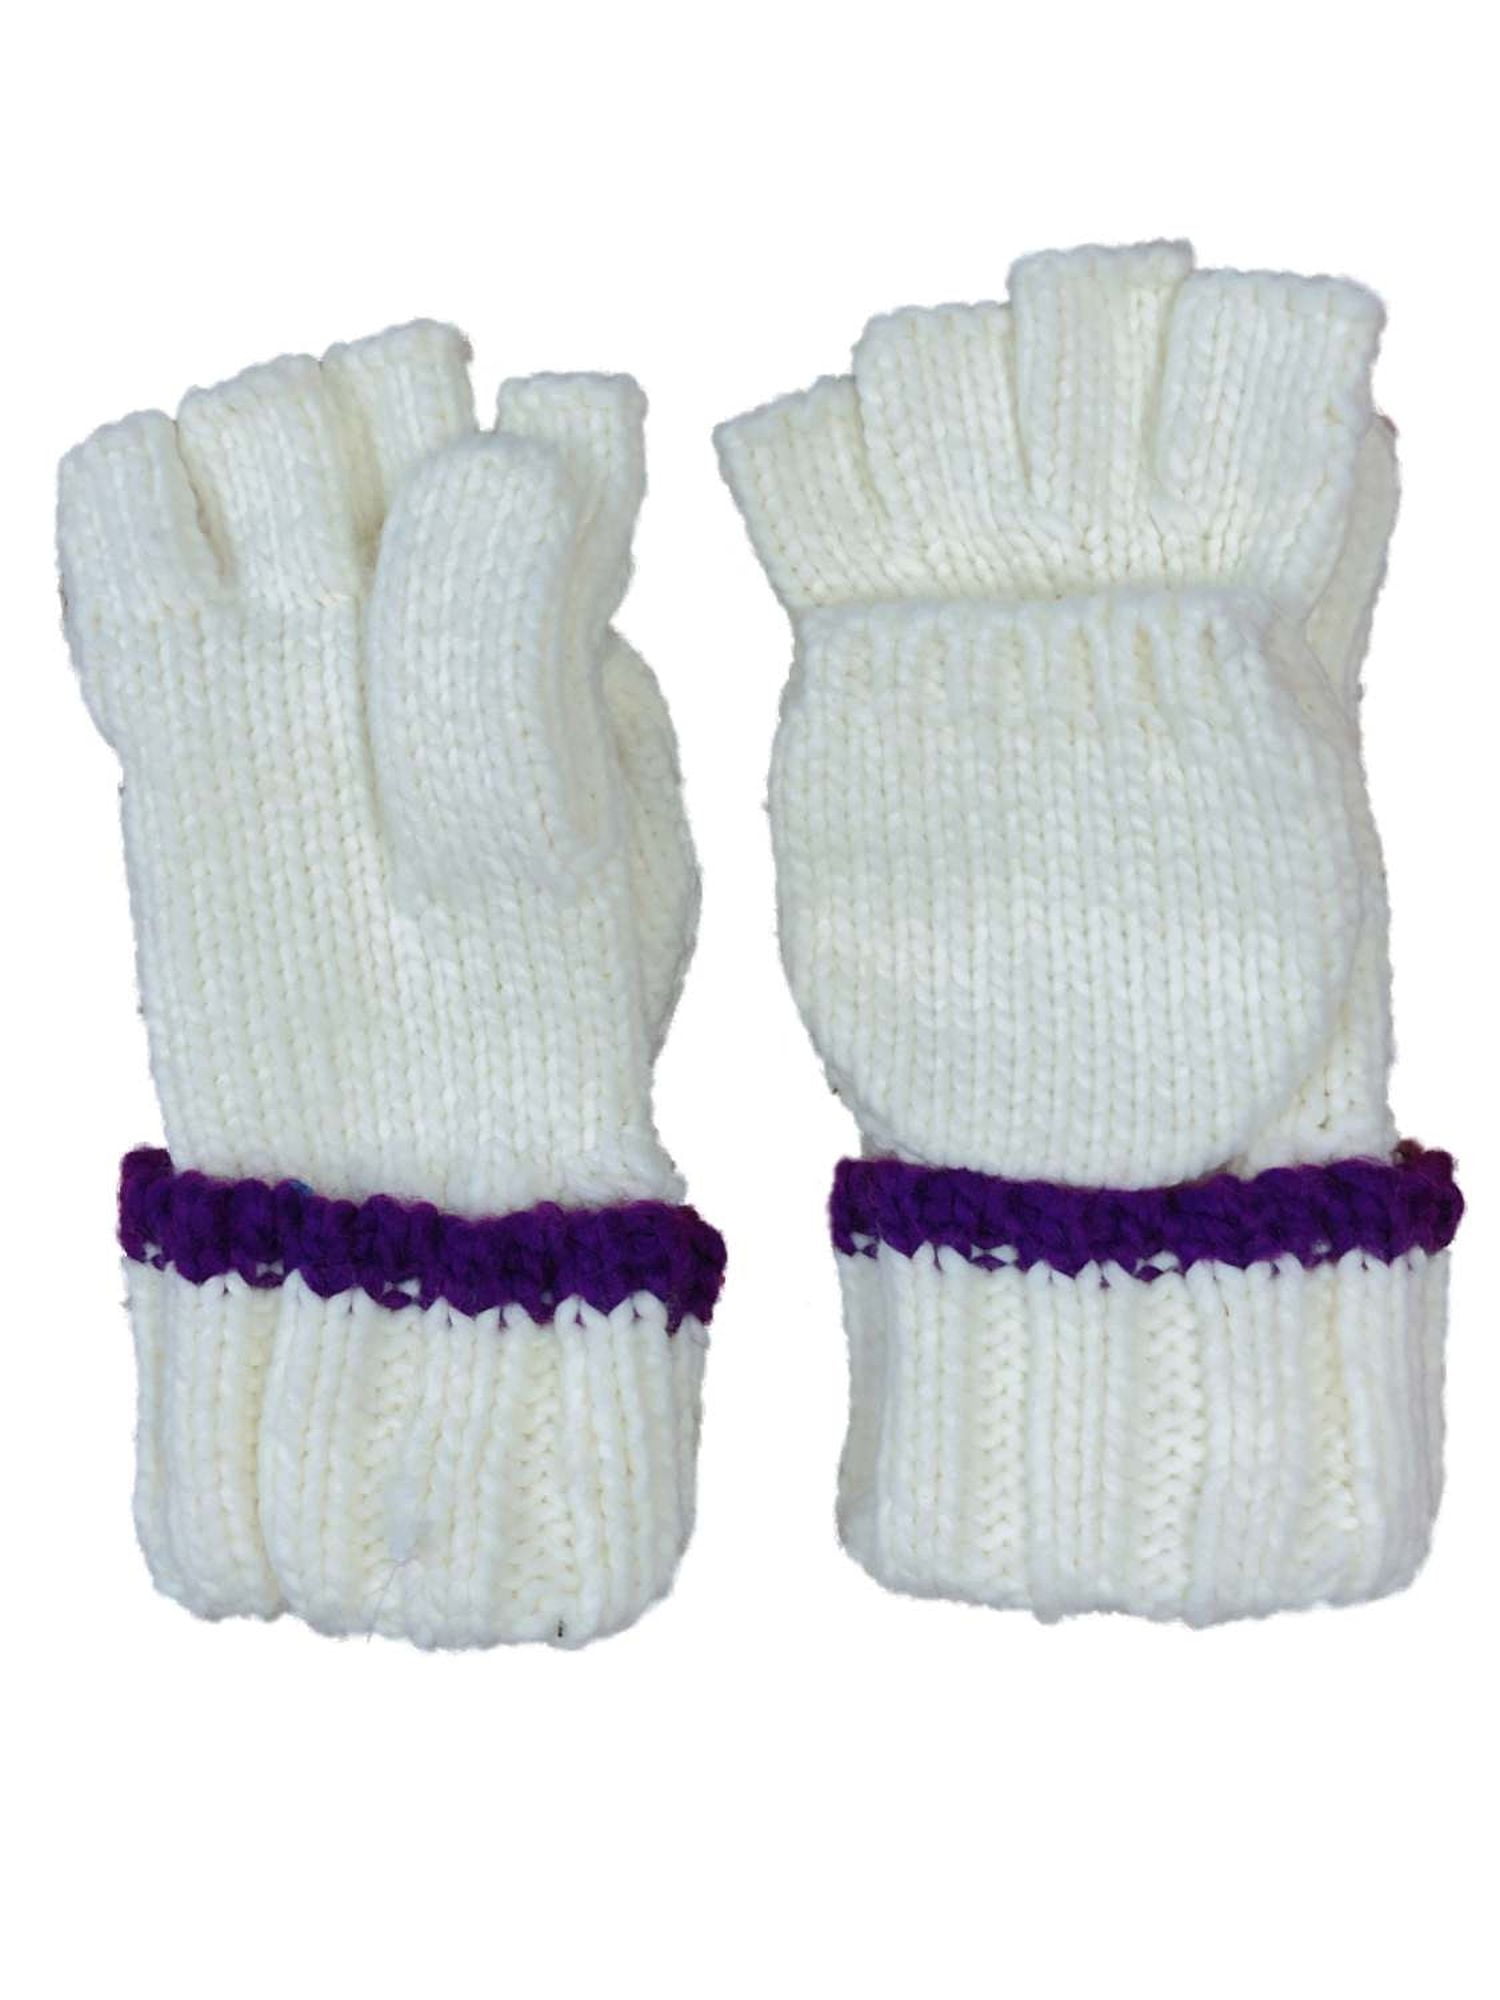 Age 1-3 Years Old 6 Pairs of Winter Warm Knitted Strip Gloves Baby Stretch Mittens for Boys and Girls QKURT Toddler Mittens